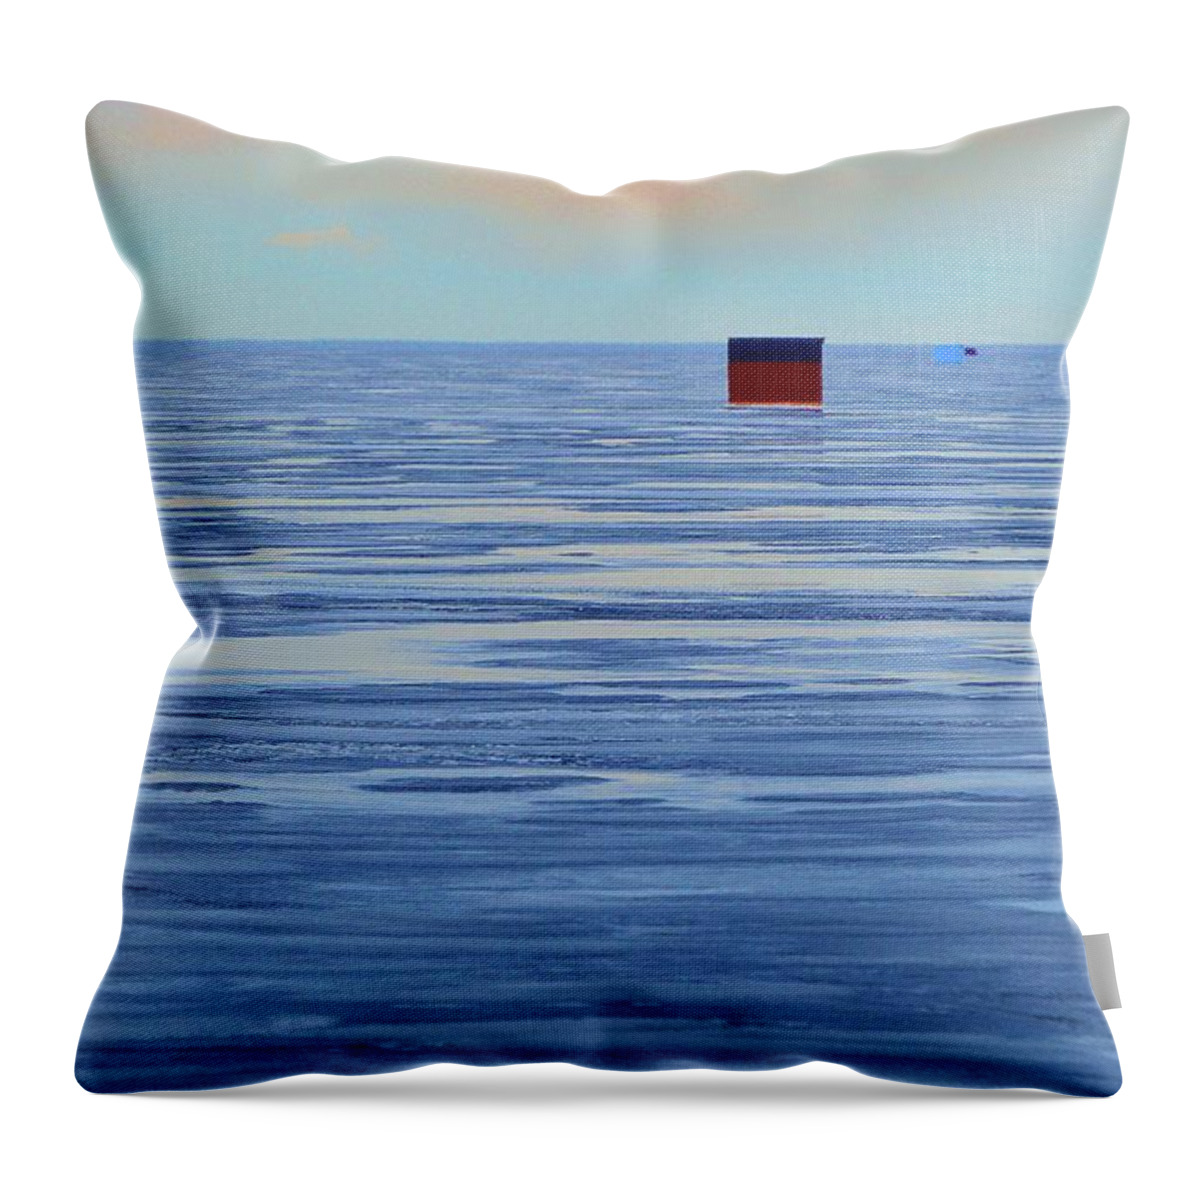 Abstract Throw Pillow featuring the digital art Ice And Ice Hut Composition by Lyle Crump